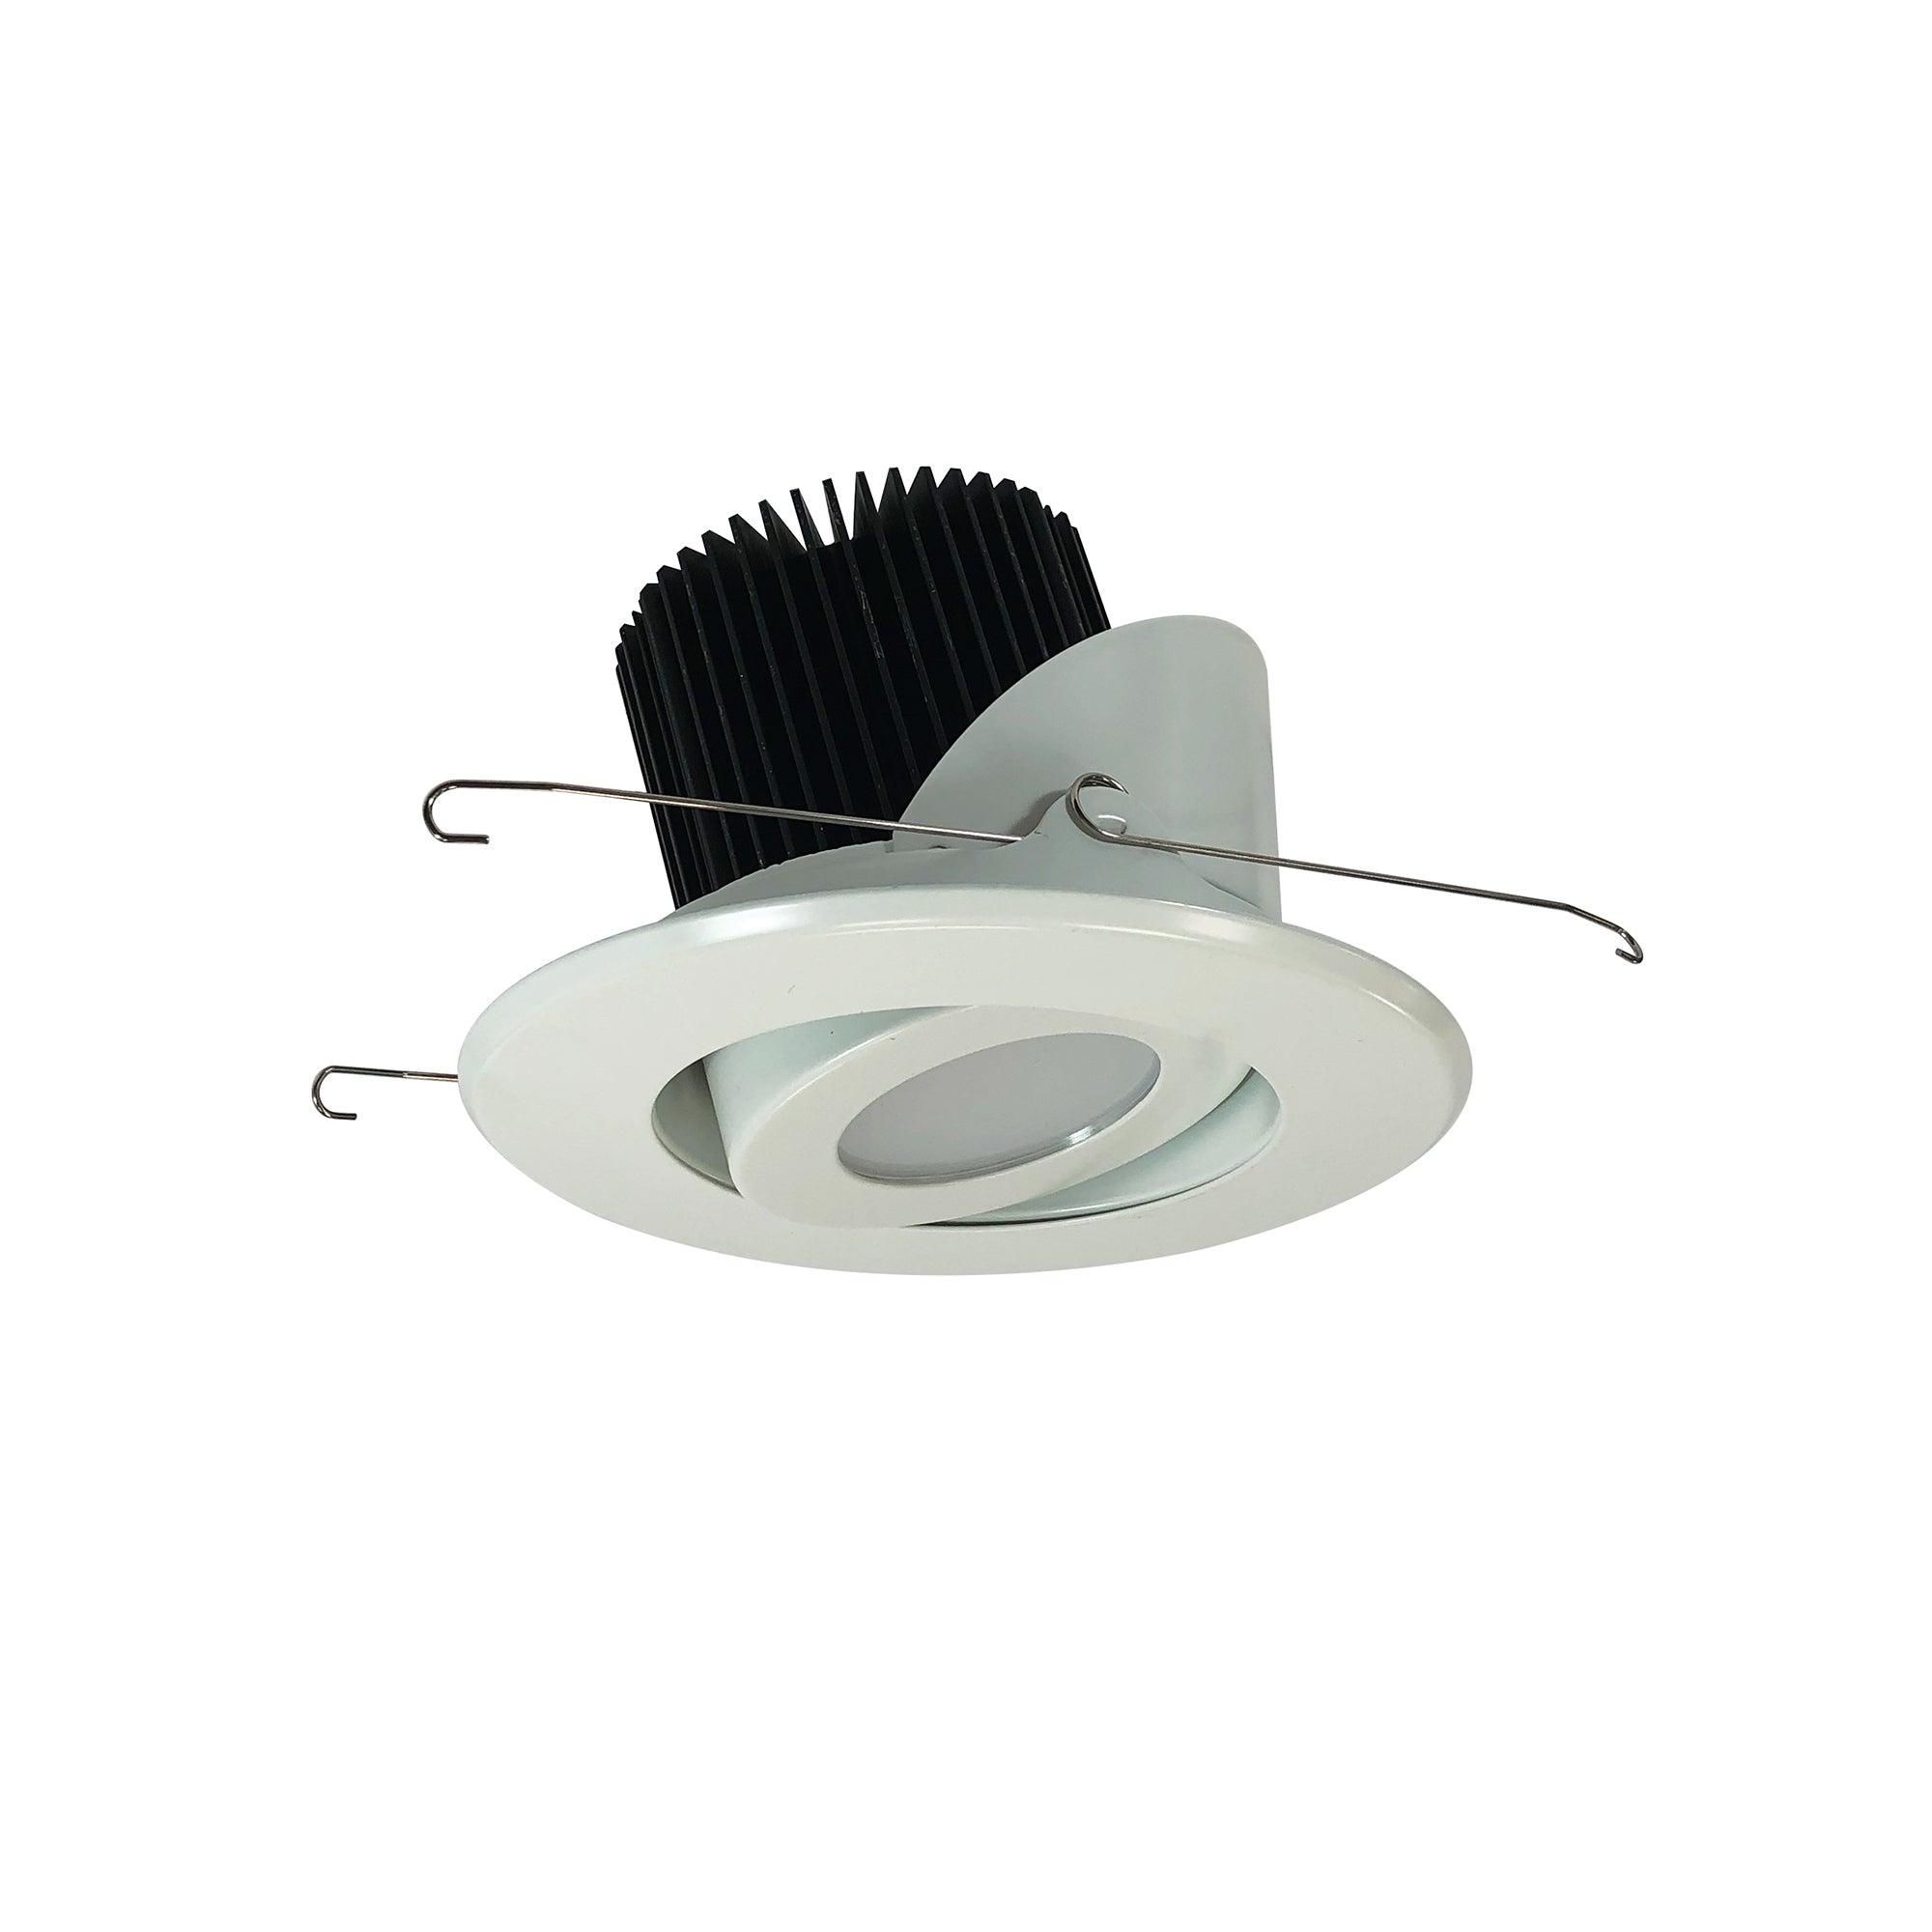 Nora Lighting LE70 - NRM2-514L1540MWW - Recessed - White